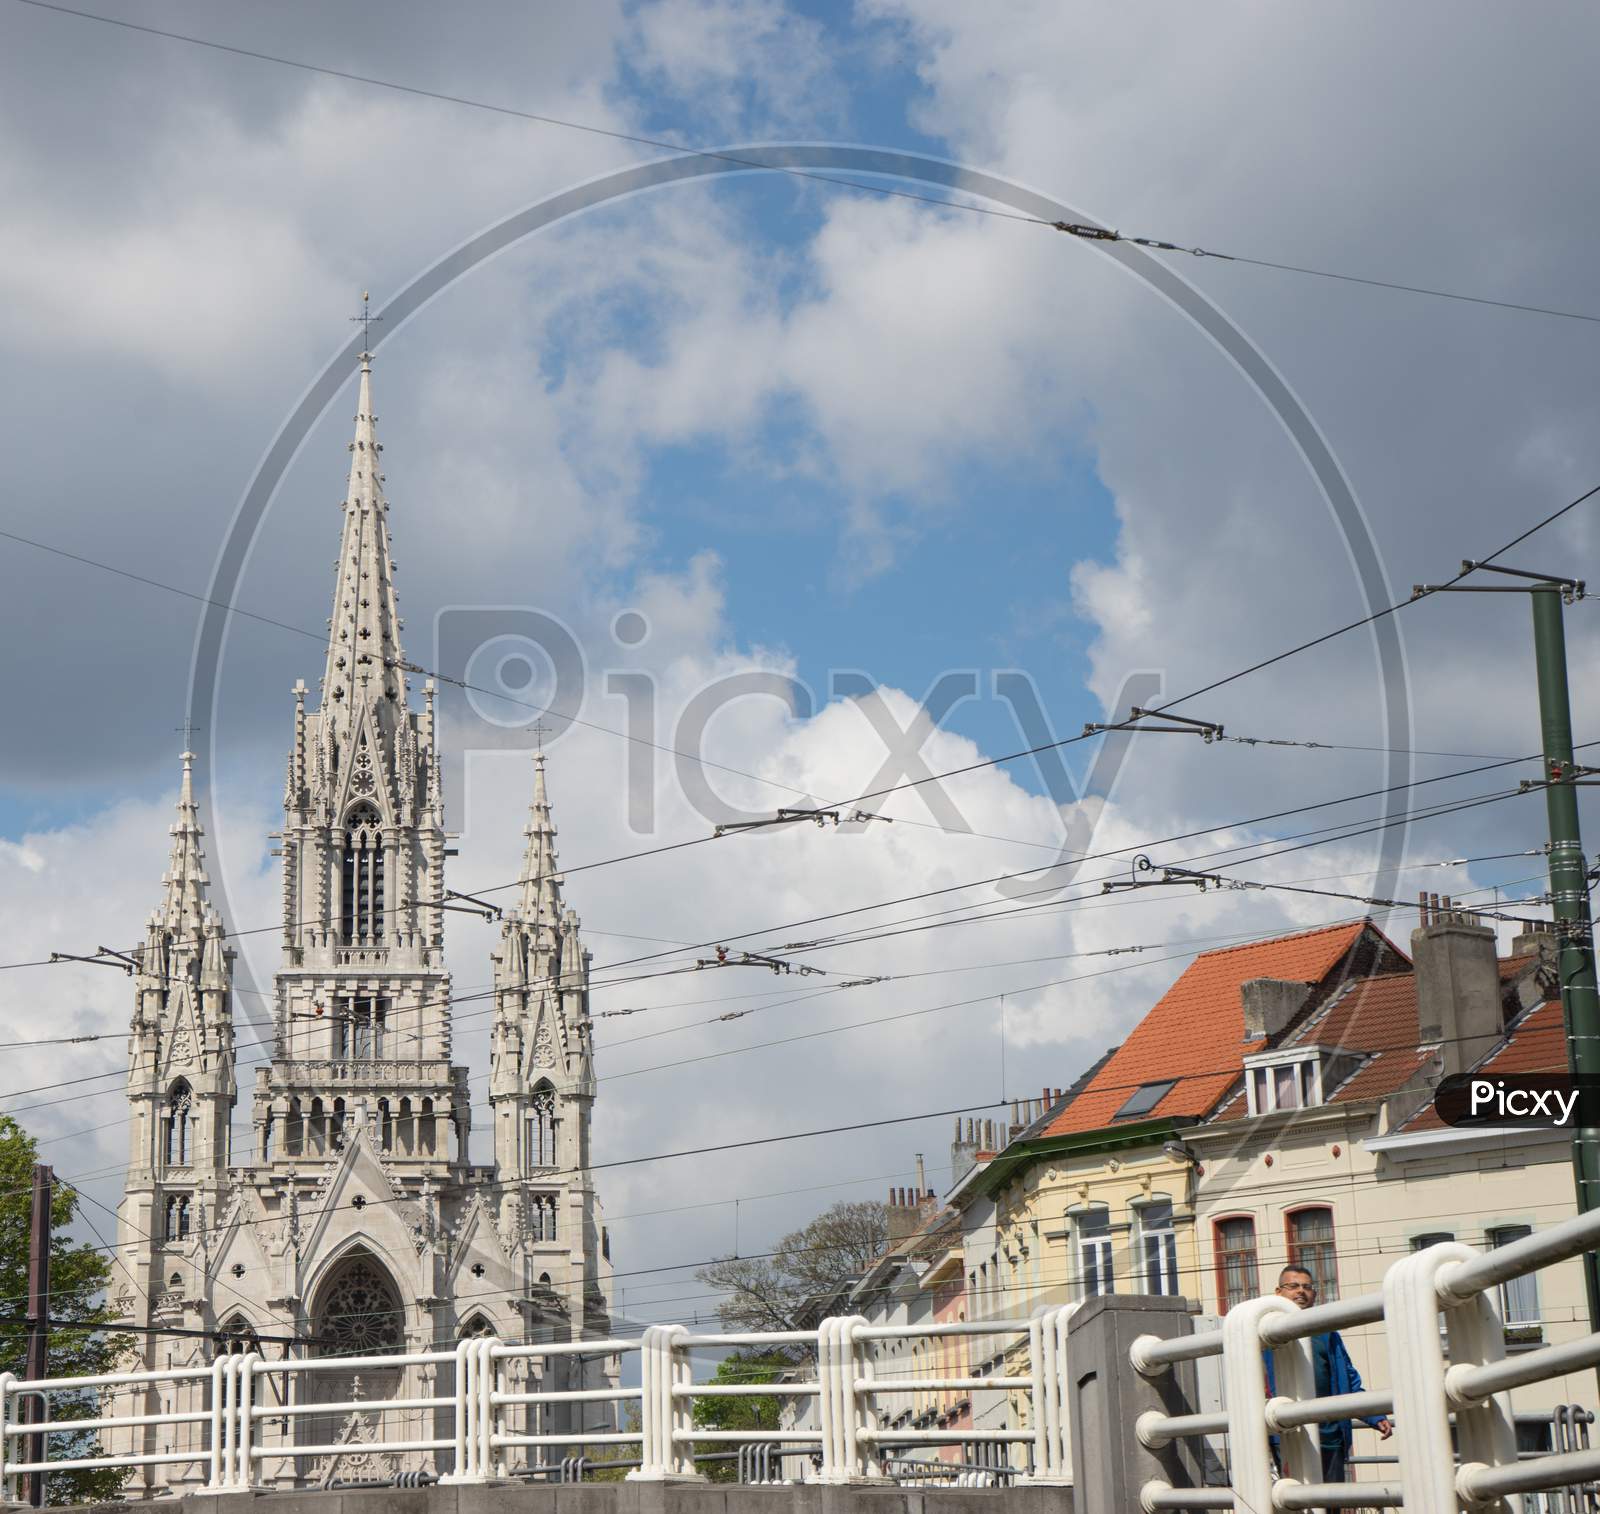 Brussels, Belgium - April 17 : A Man Walks In Front Of Church Of Our Lady Of Laeken Near The Atomium In Brussels, Belgium On April 17, 2017